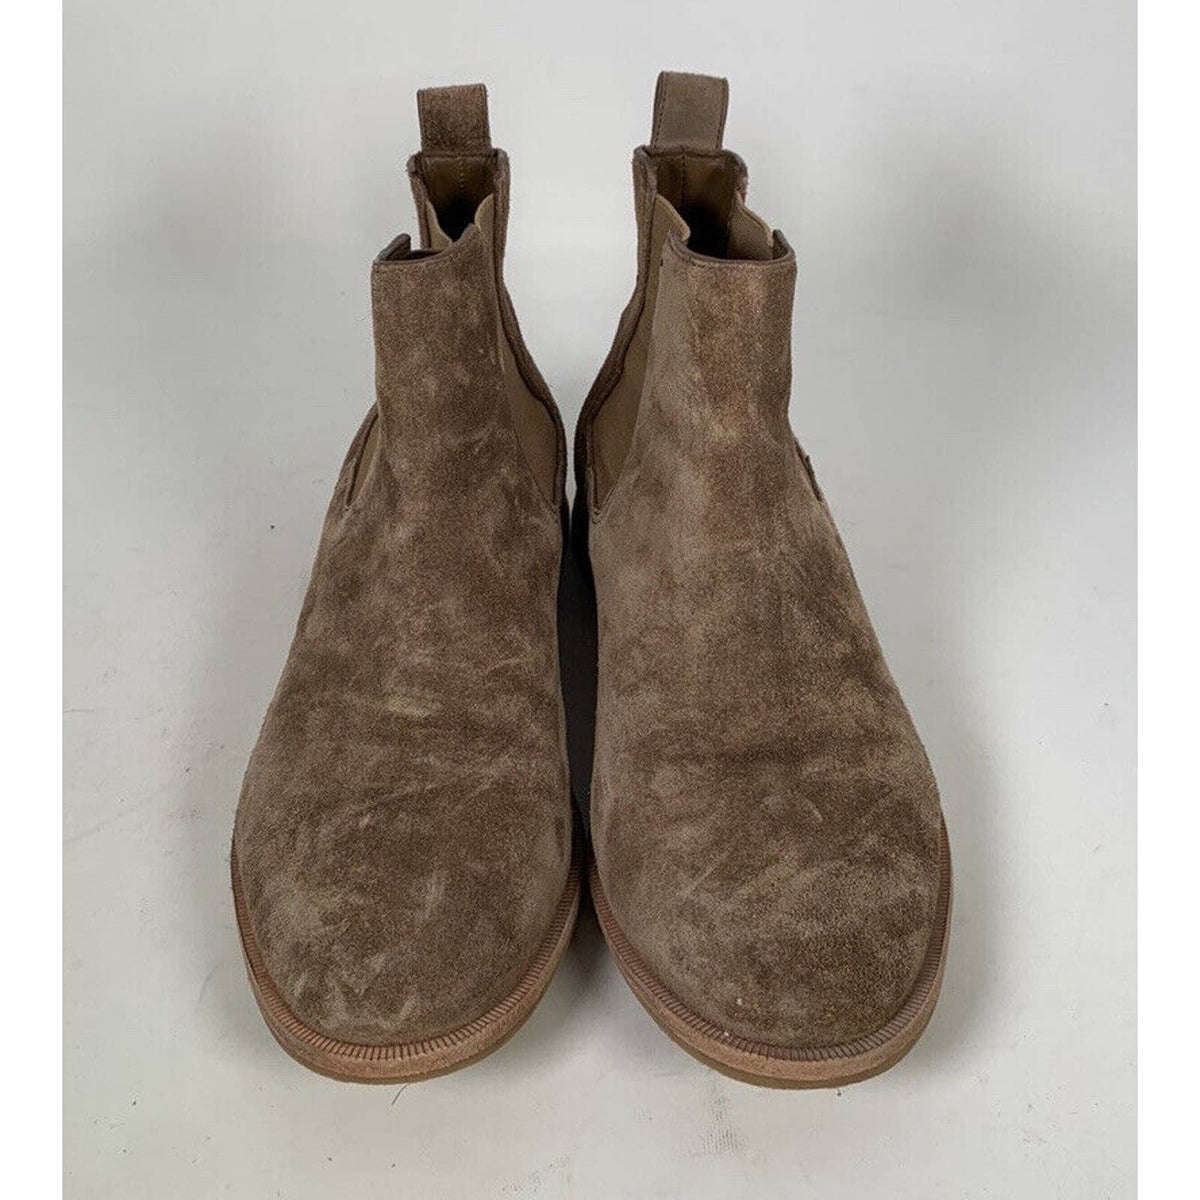 Tory Burch River Rock Brown Suede Chelsea Boots Sz.9 M